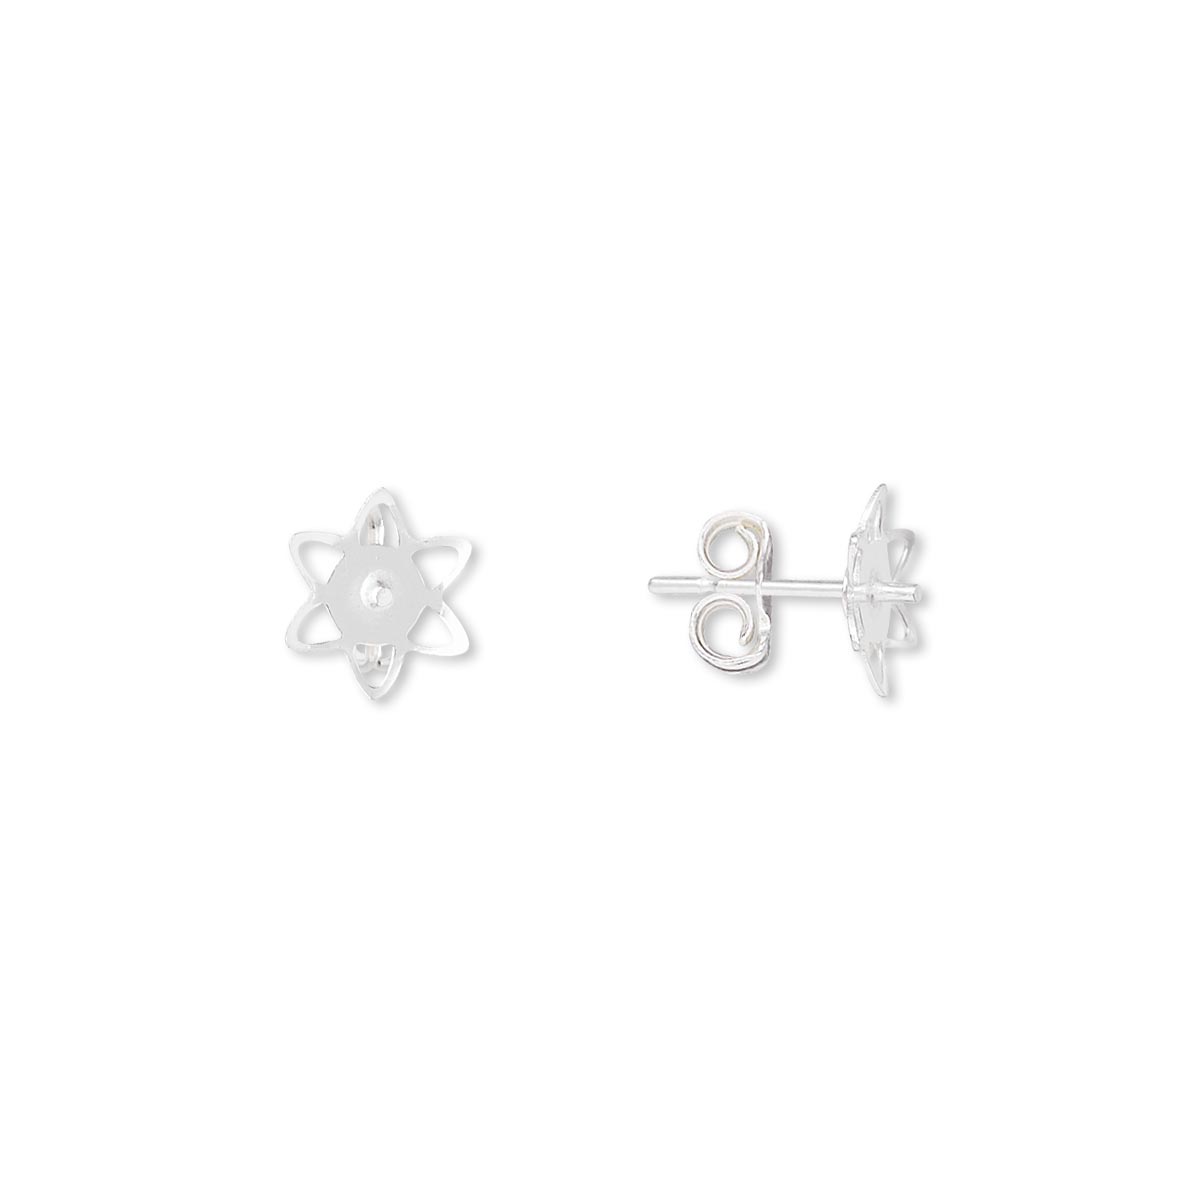 Earstud, sterling silver, 7mm flower with 2mm peg, fits 4-6mm half ...